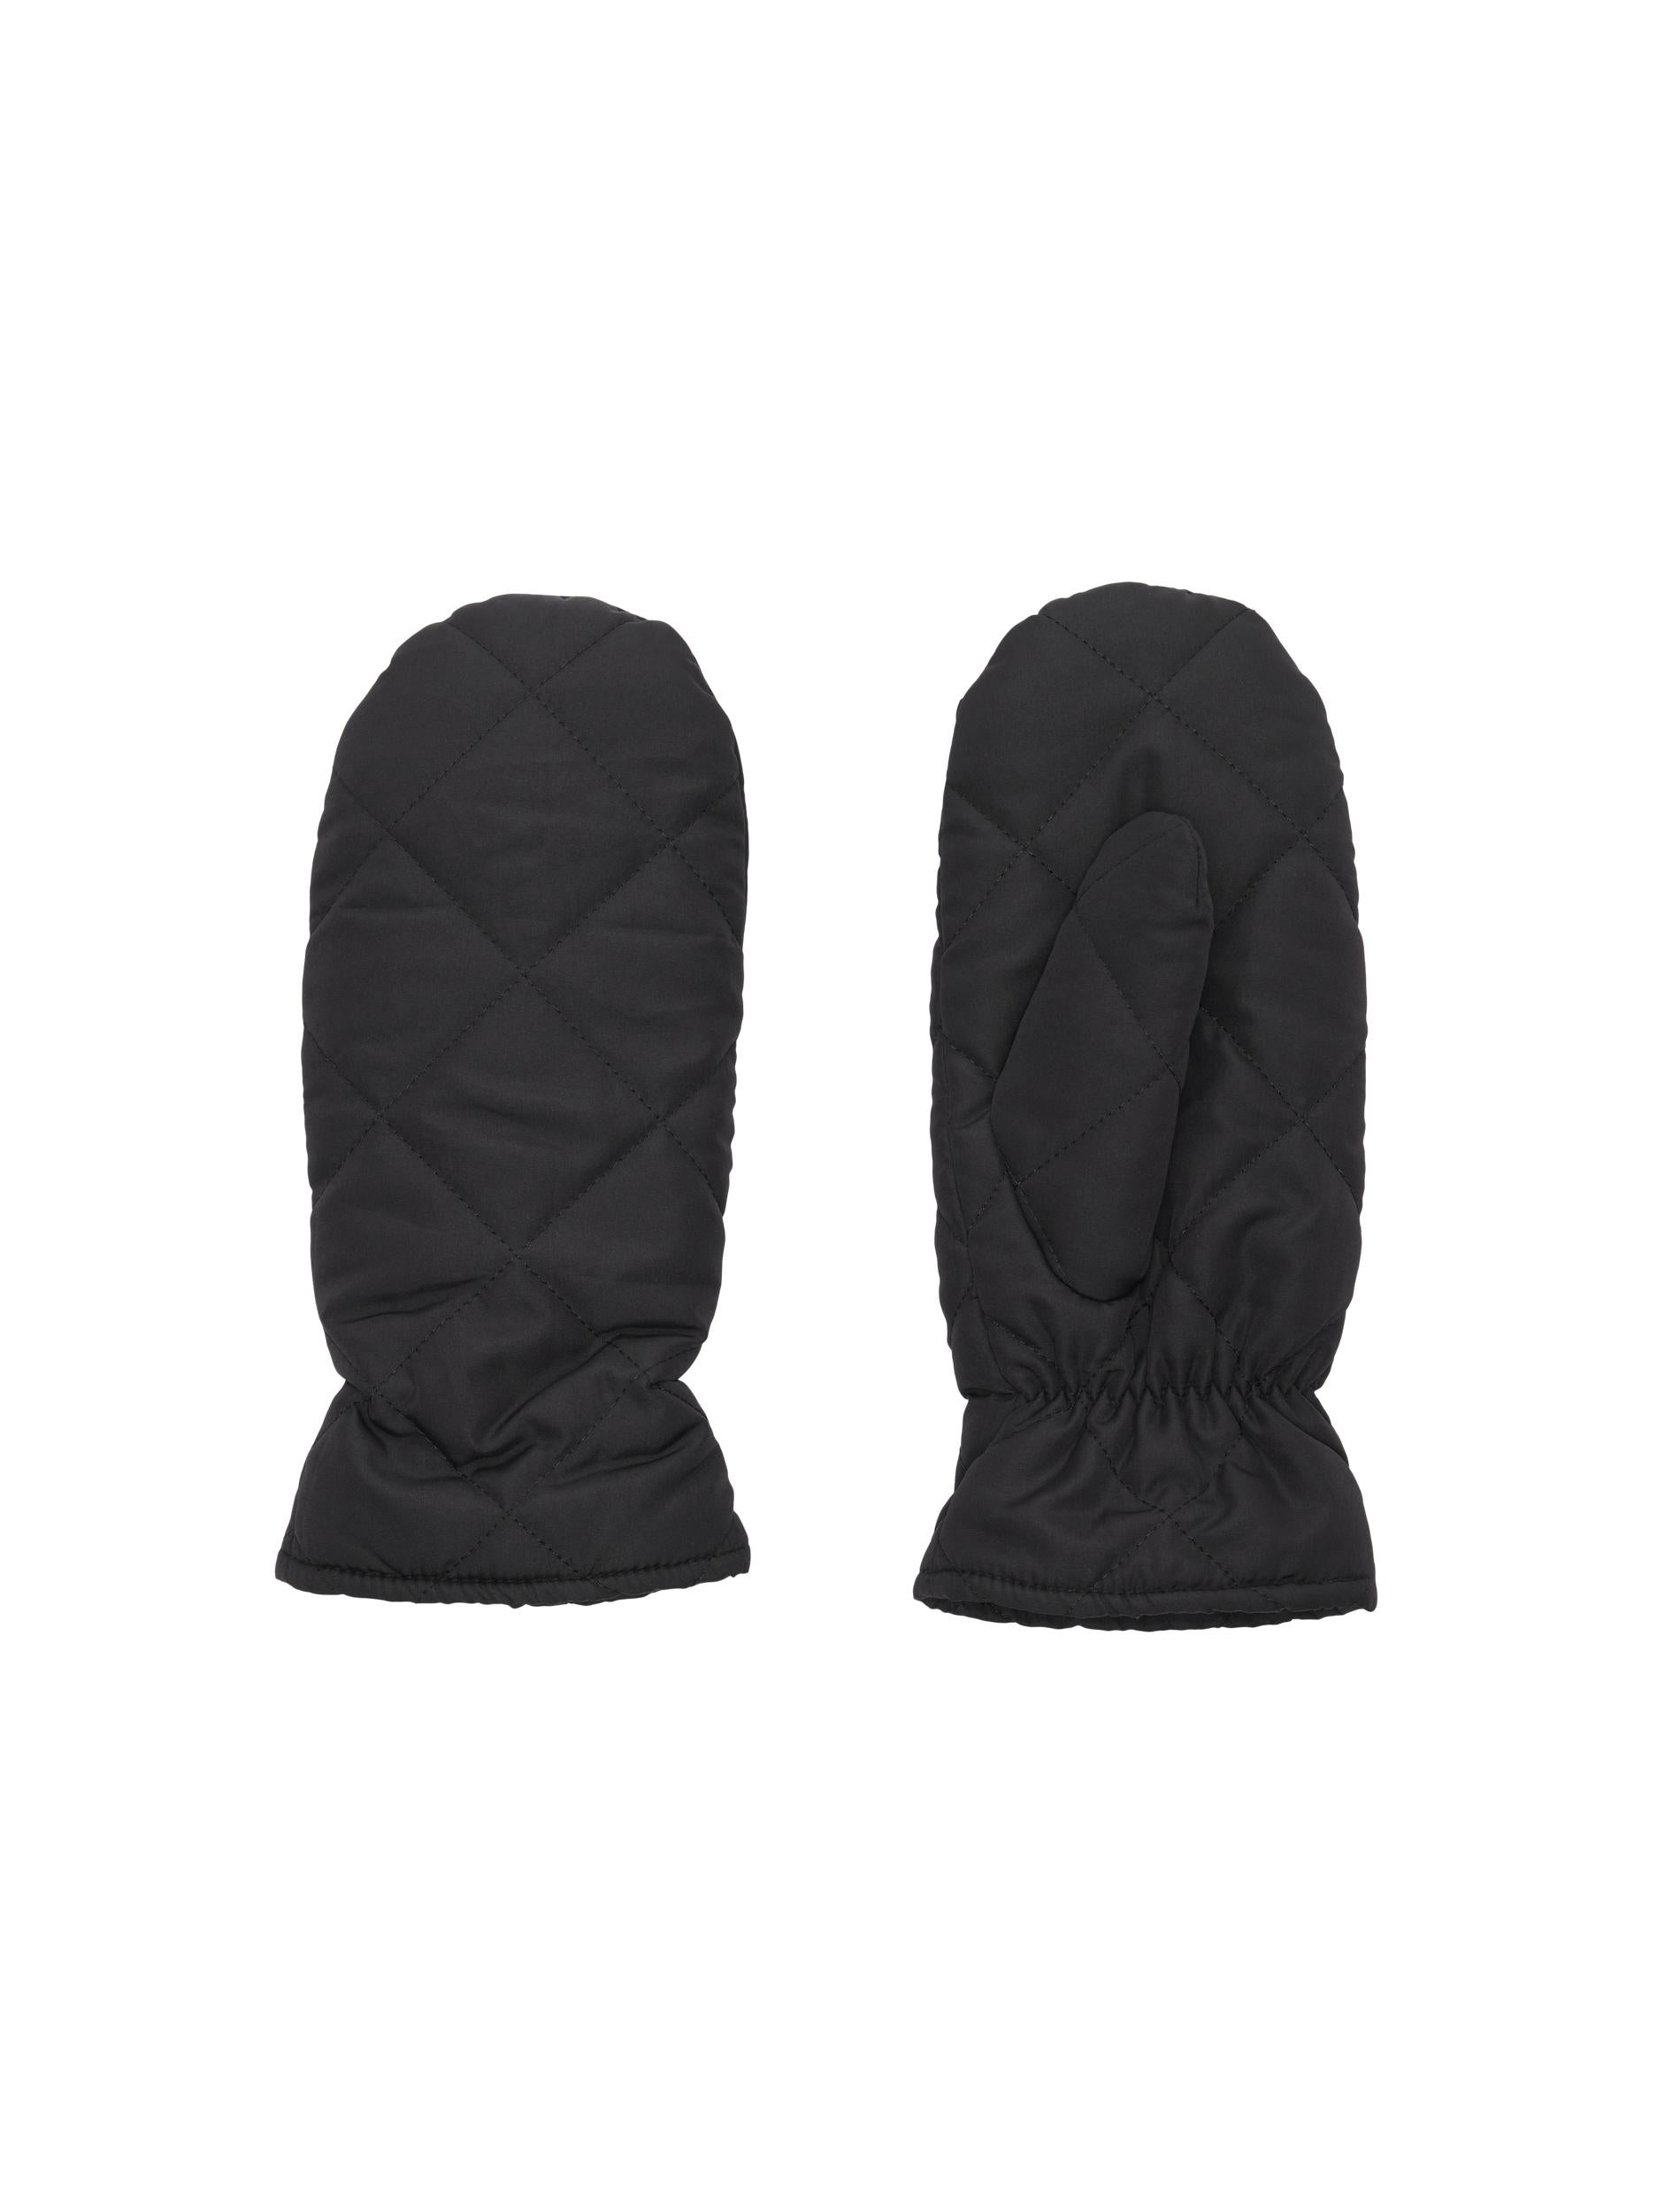 Selected Femme "Magna" Padded Mittens